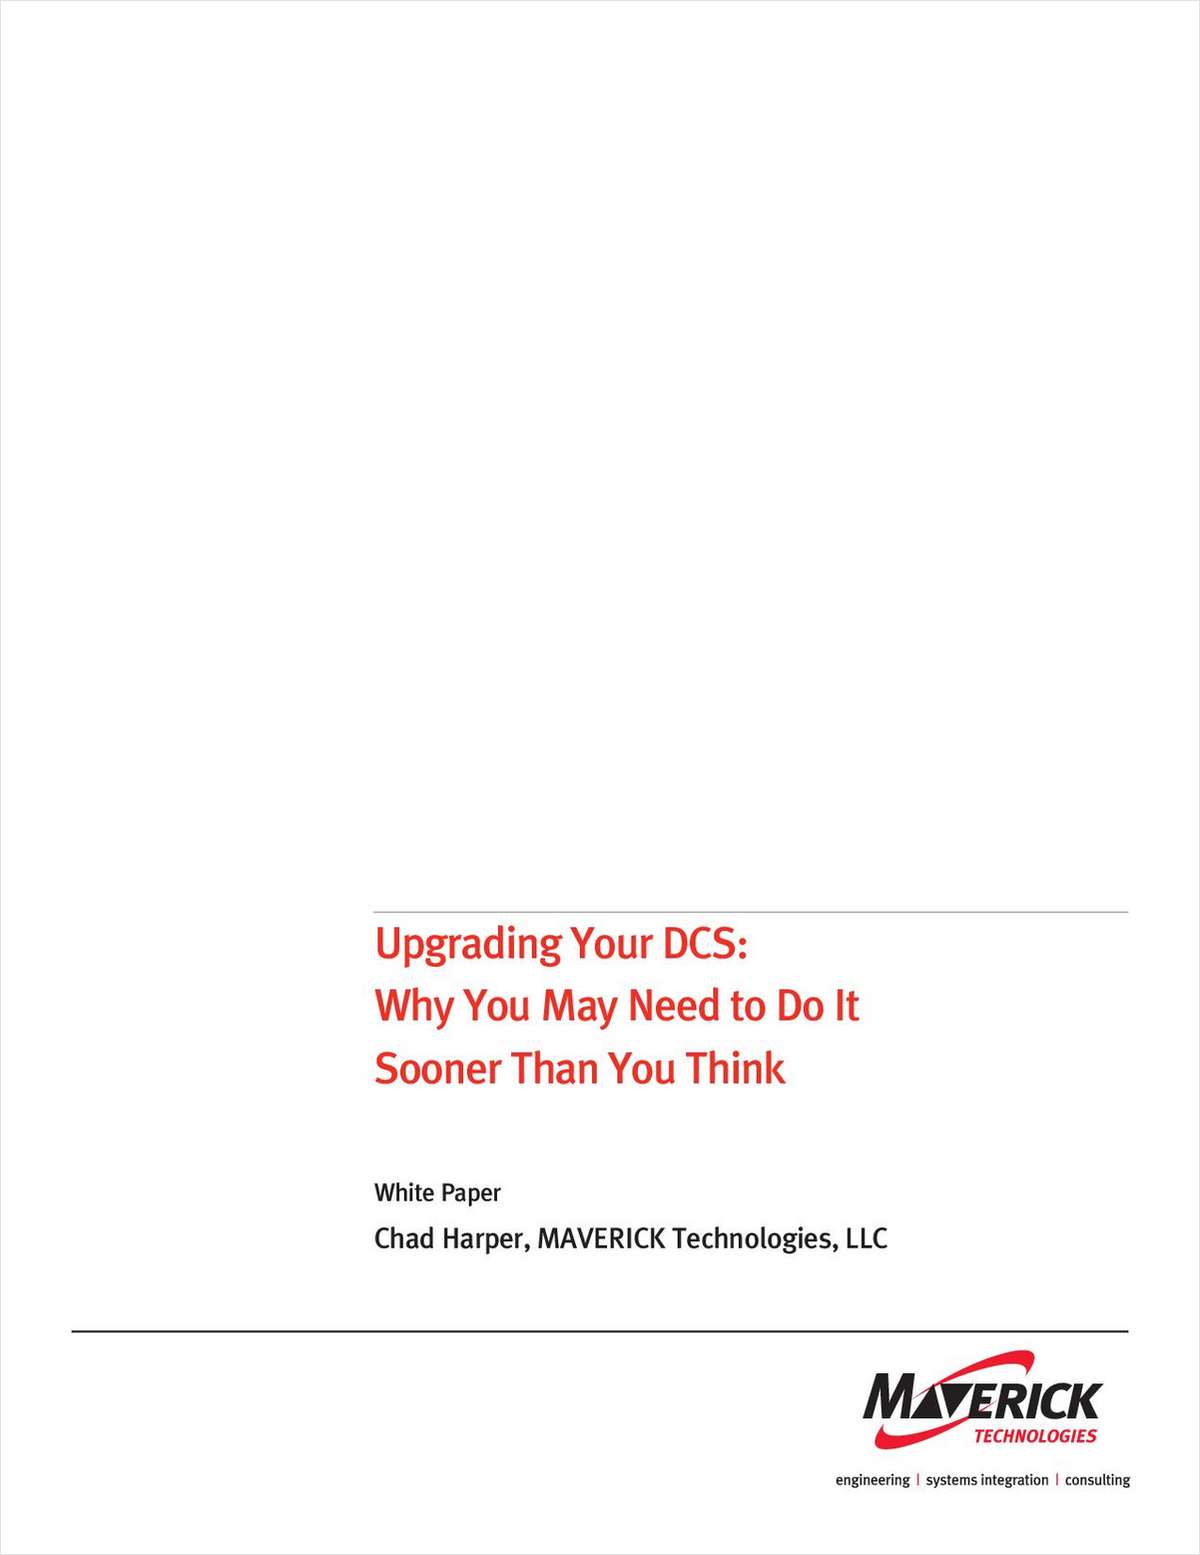 Upgrading Your DCS: Why You May Need to Do It Sooner Than You Think